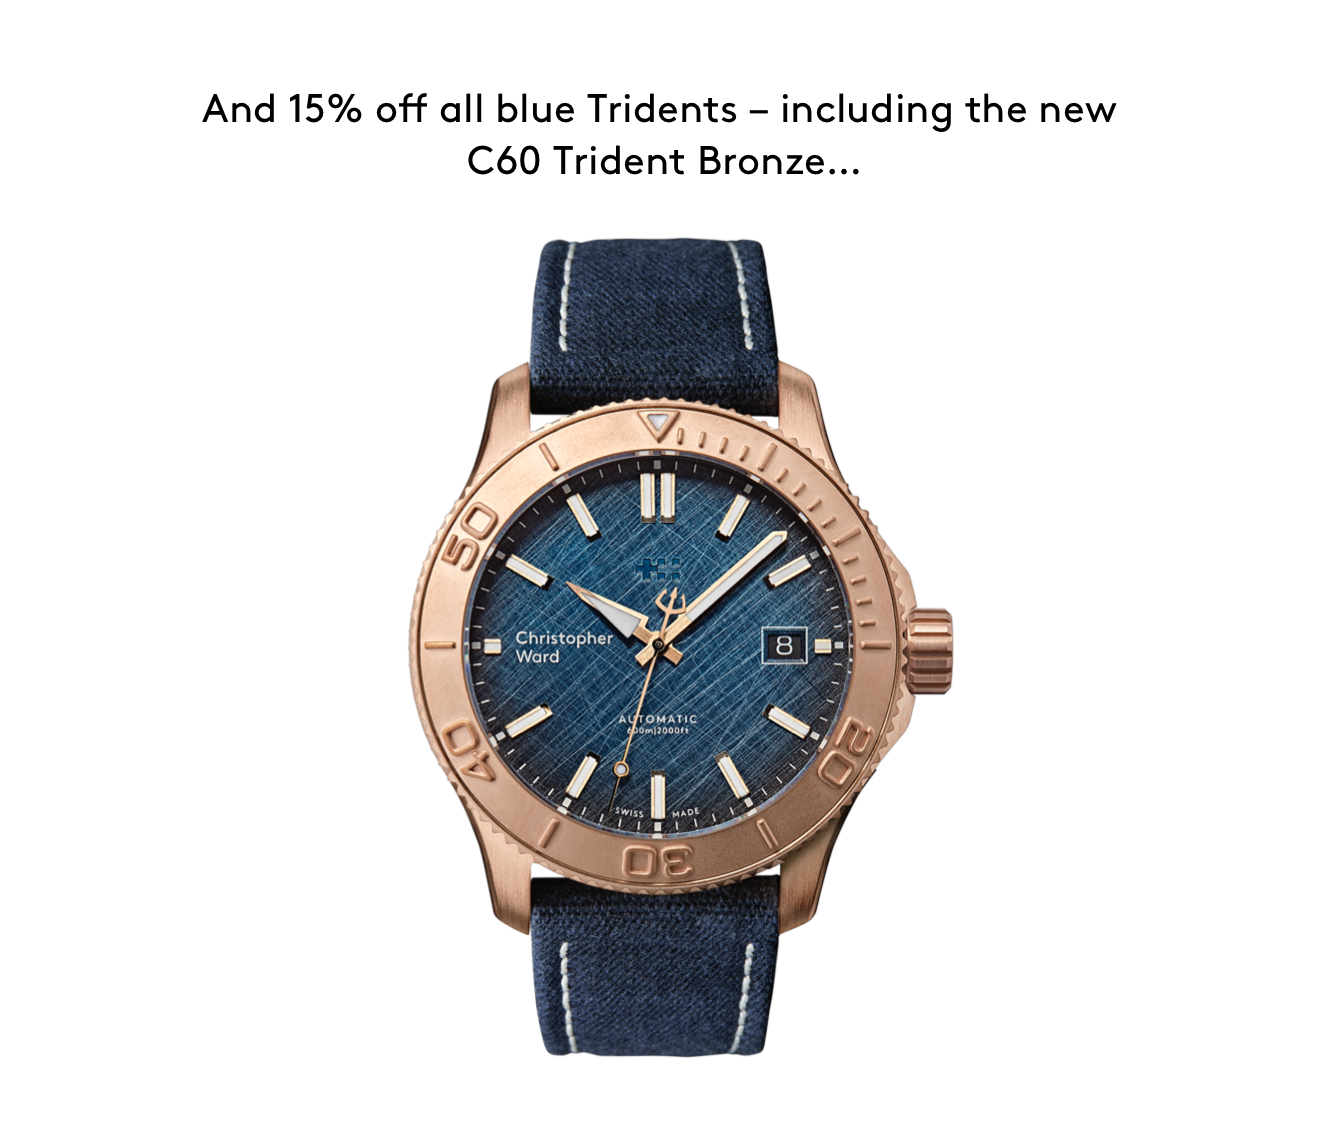 And 15% off all blue Tridents - including the new C60 Trident Bronze...